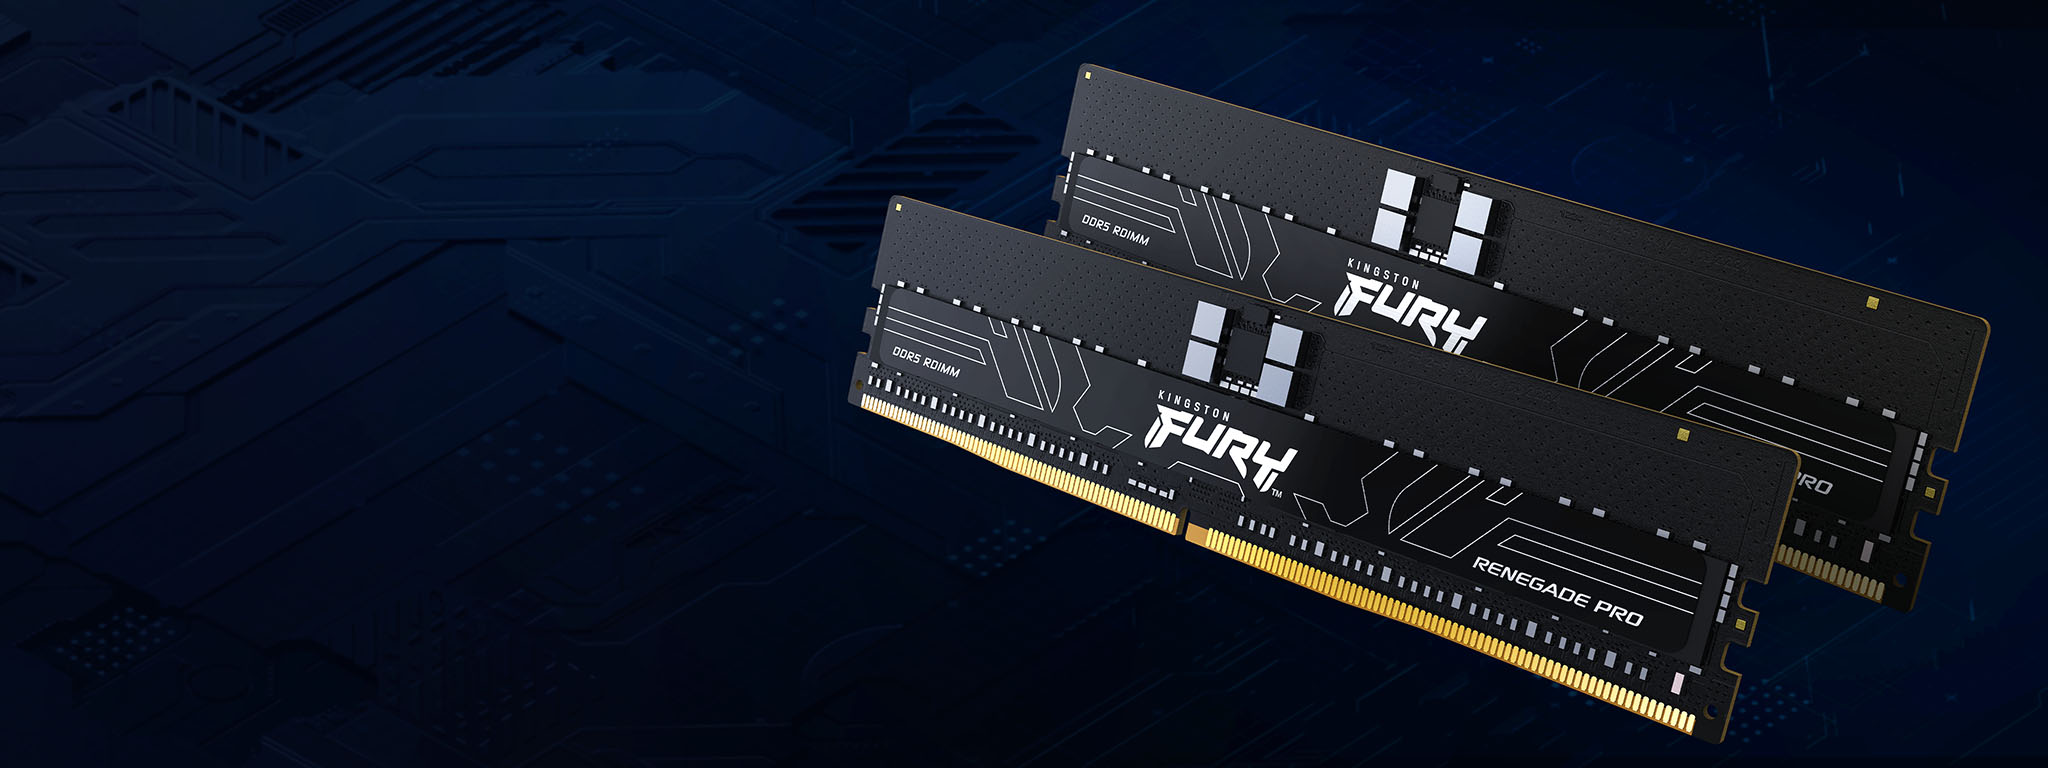 A pair of Kingston FURY Renegade Pro DDR5 RDIMM memory modules sit against a black background